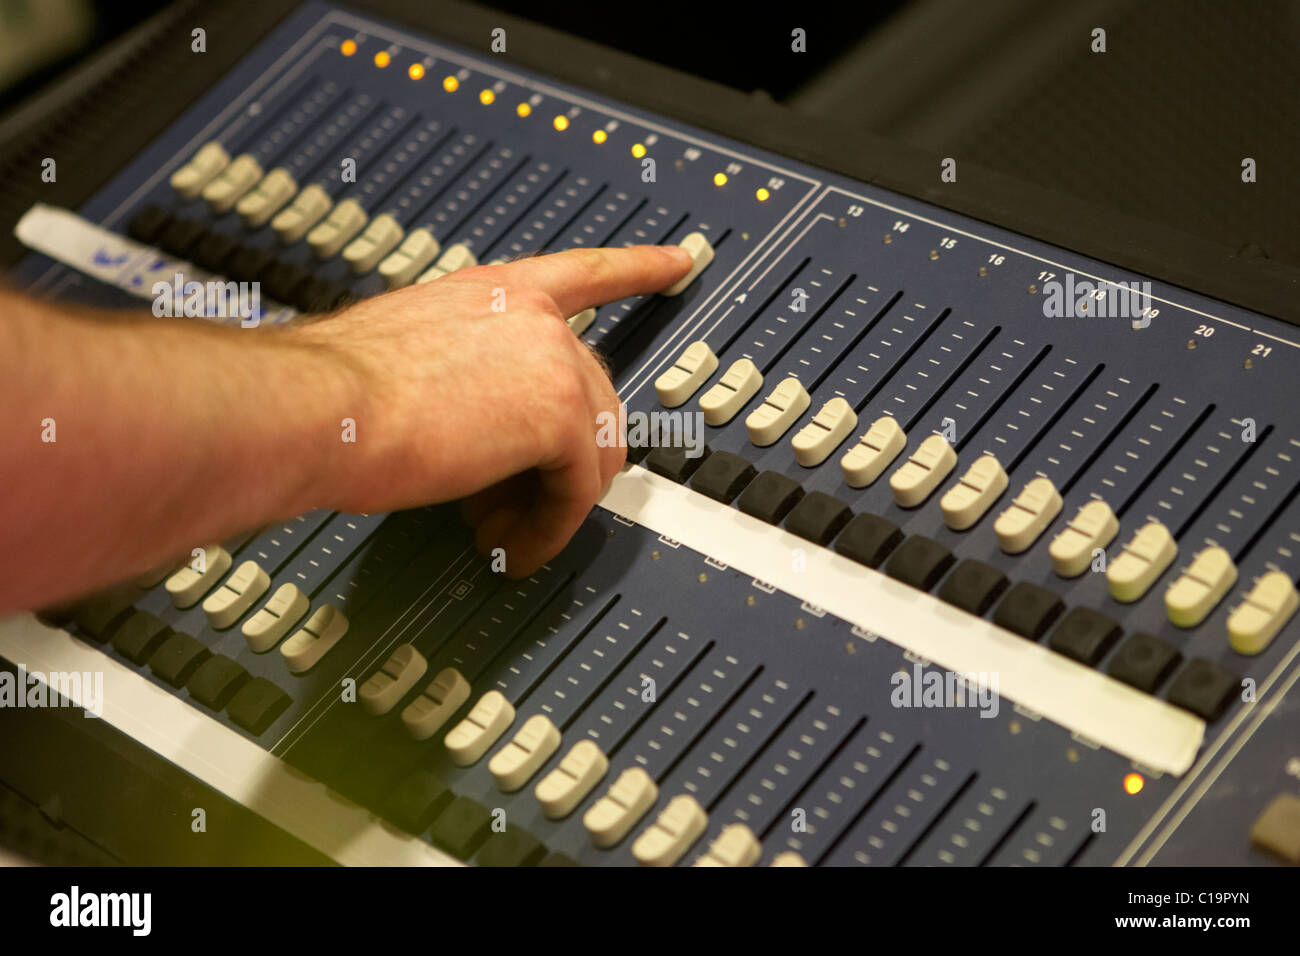 lighting engineer adjusting sliders on a lighting mixing desk in a theatre concert hall Stock Photo